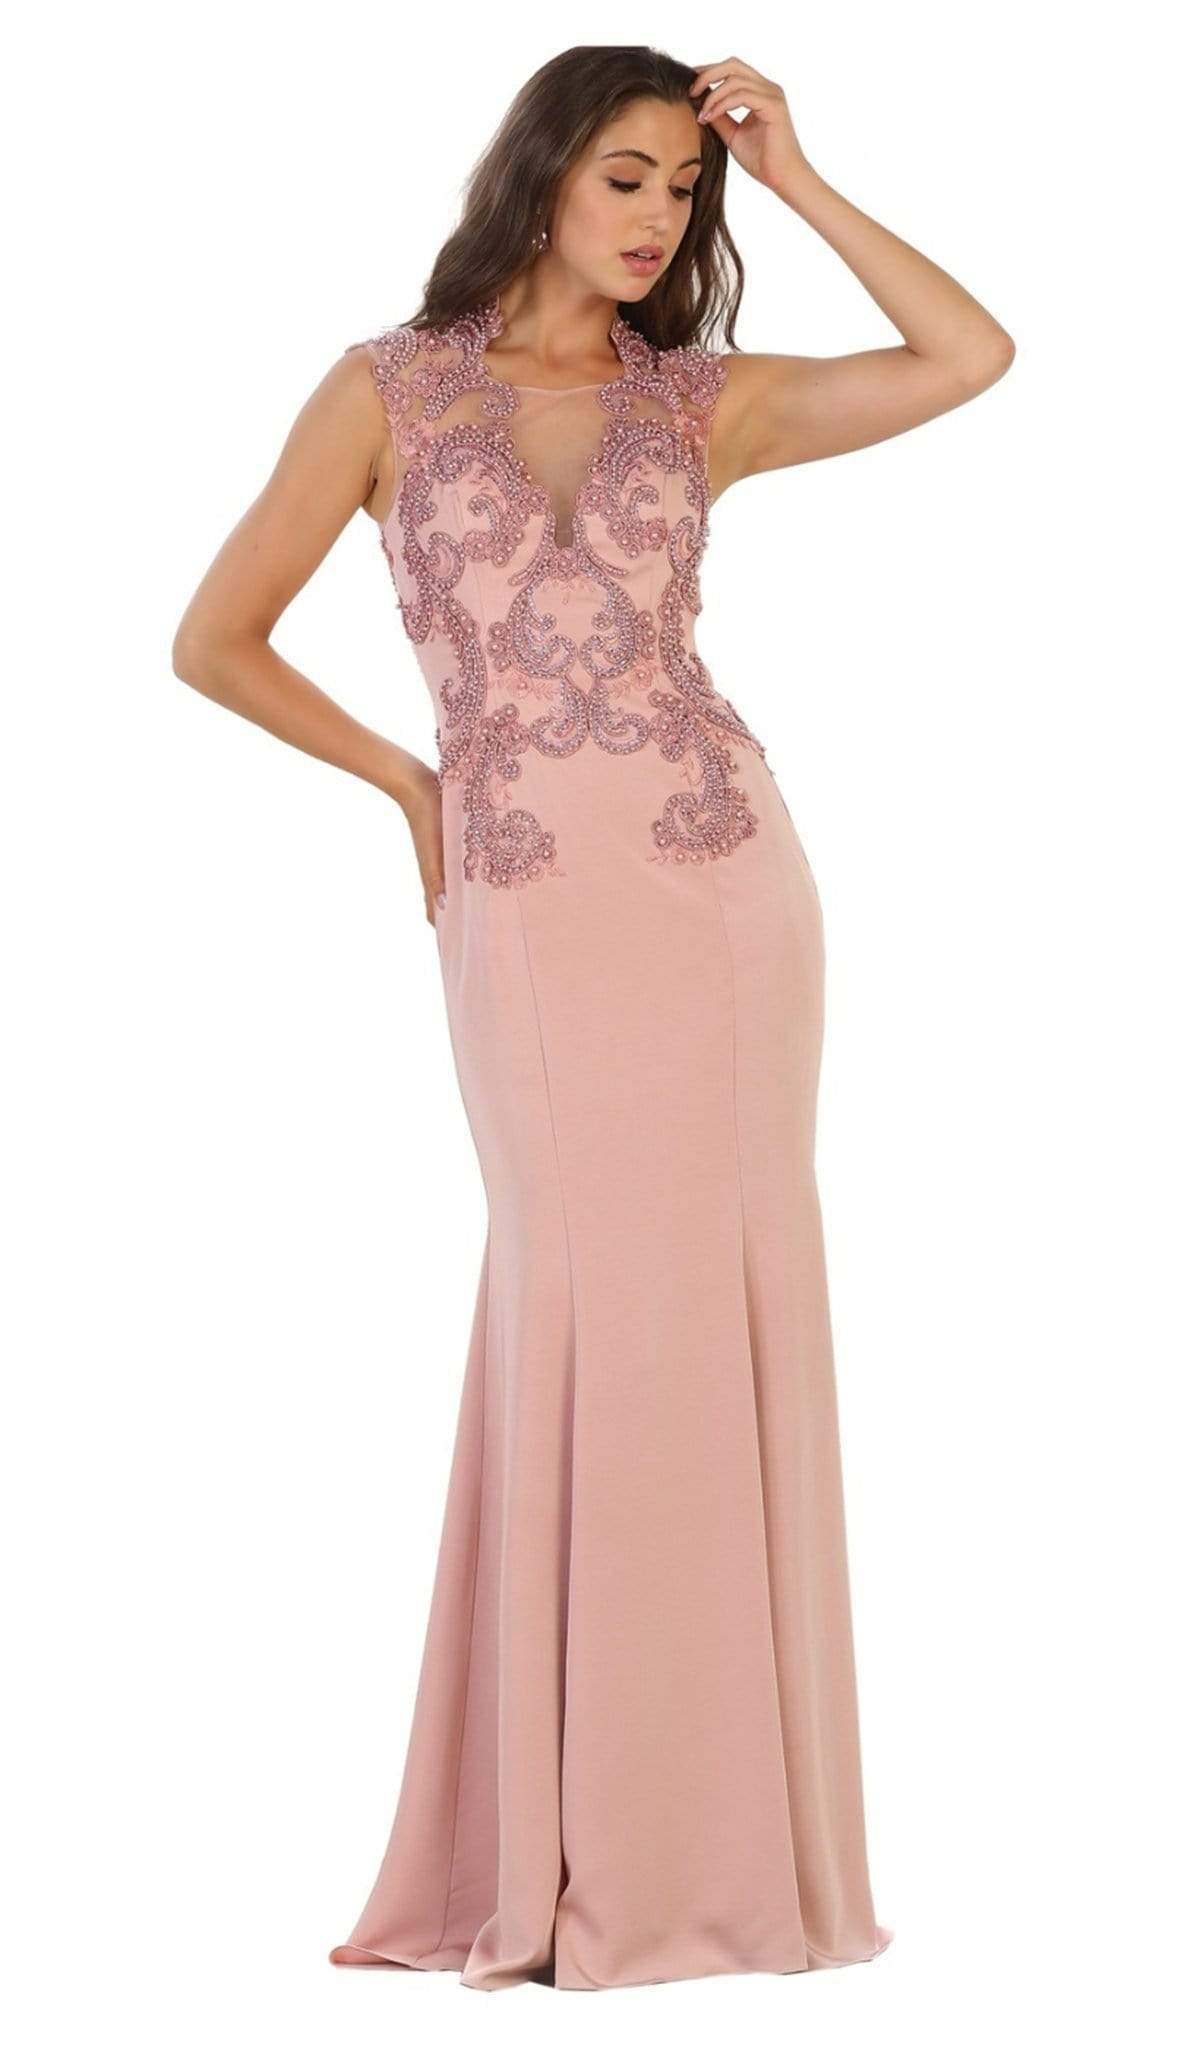 May Queen - RQ7534 Beaded Queen Anne Mermaid Gown Special Occasion Dress 4 / Dusty-Rose